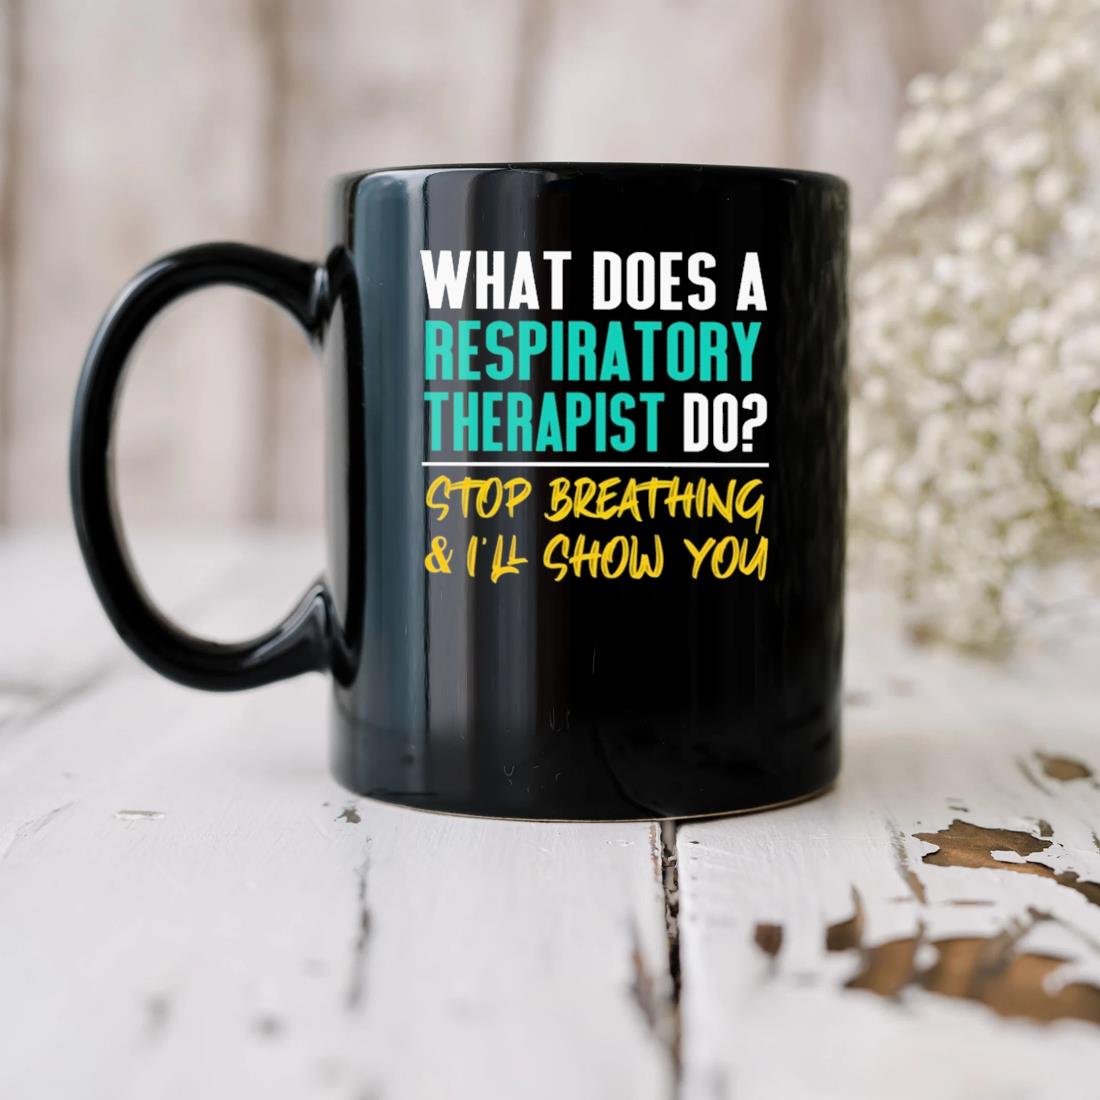 What Does A Respiratory Therapist Do Stop Breathing And I'll Show You Mug